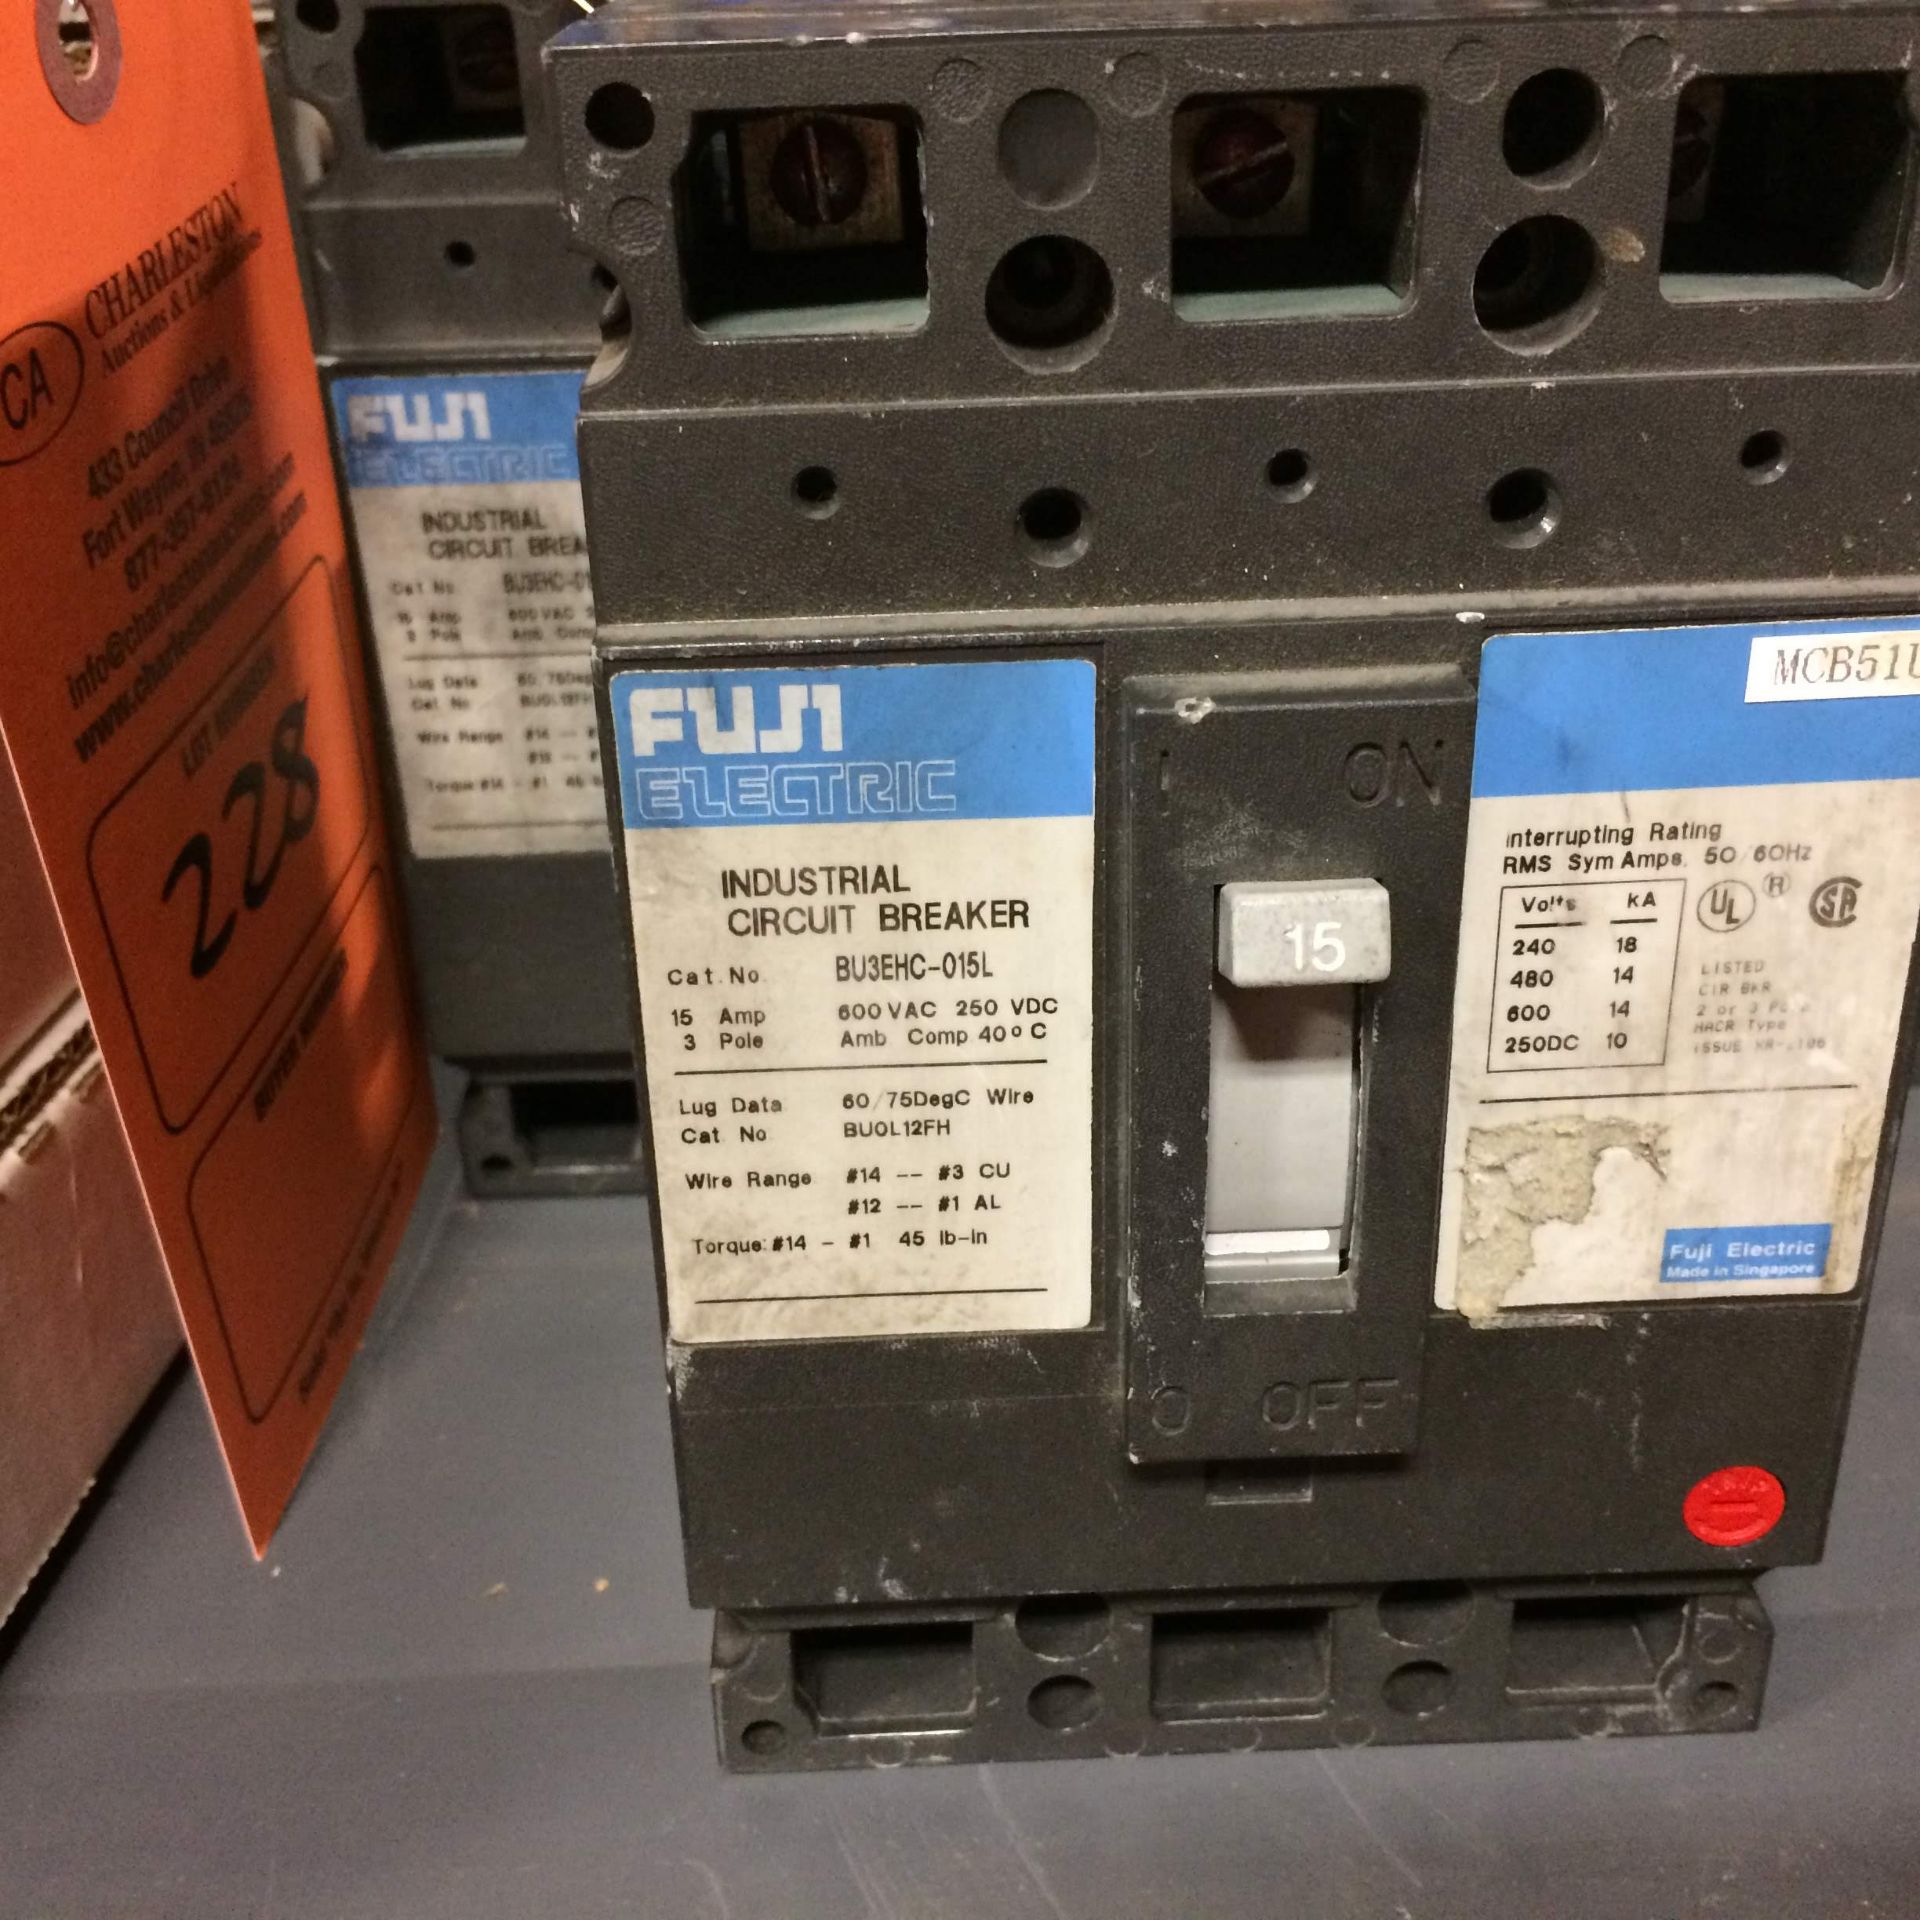 (2) BU3EHC-015L FUJI ELECTRIC INDUSTRIAL CIRCUIT BREAKER USED Pickup your lot(s) for free! - Image 2 of 5